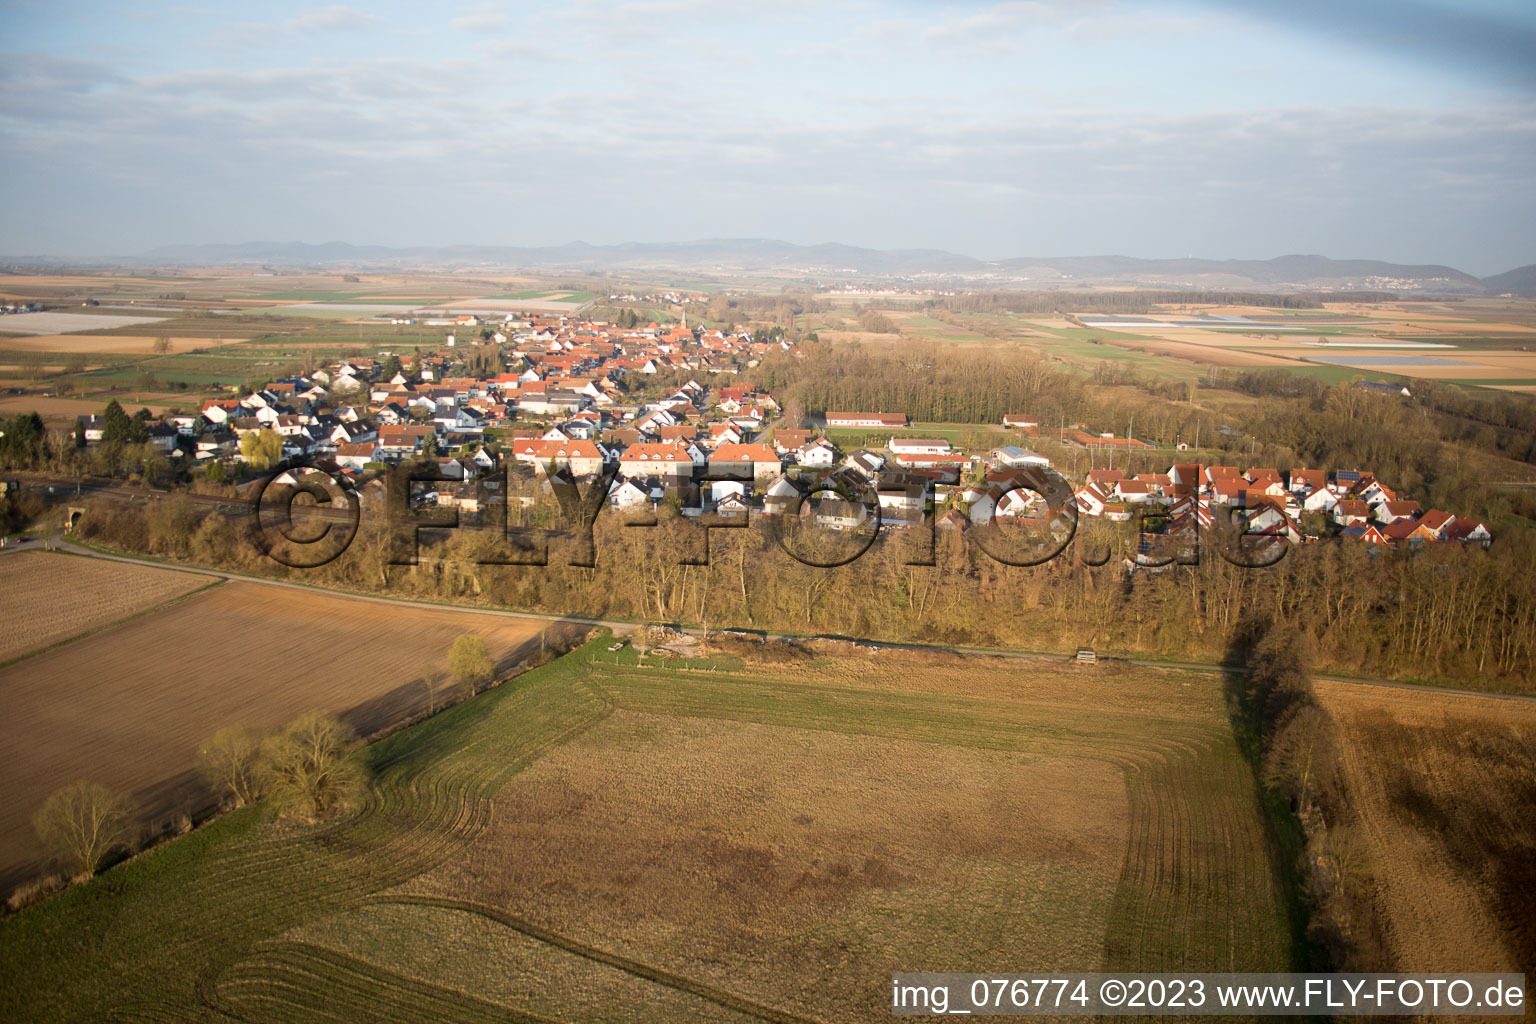 Drone image of Winden in the state Rhineland-Palatinate, Germany